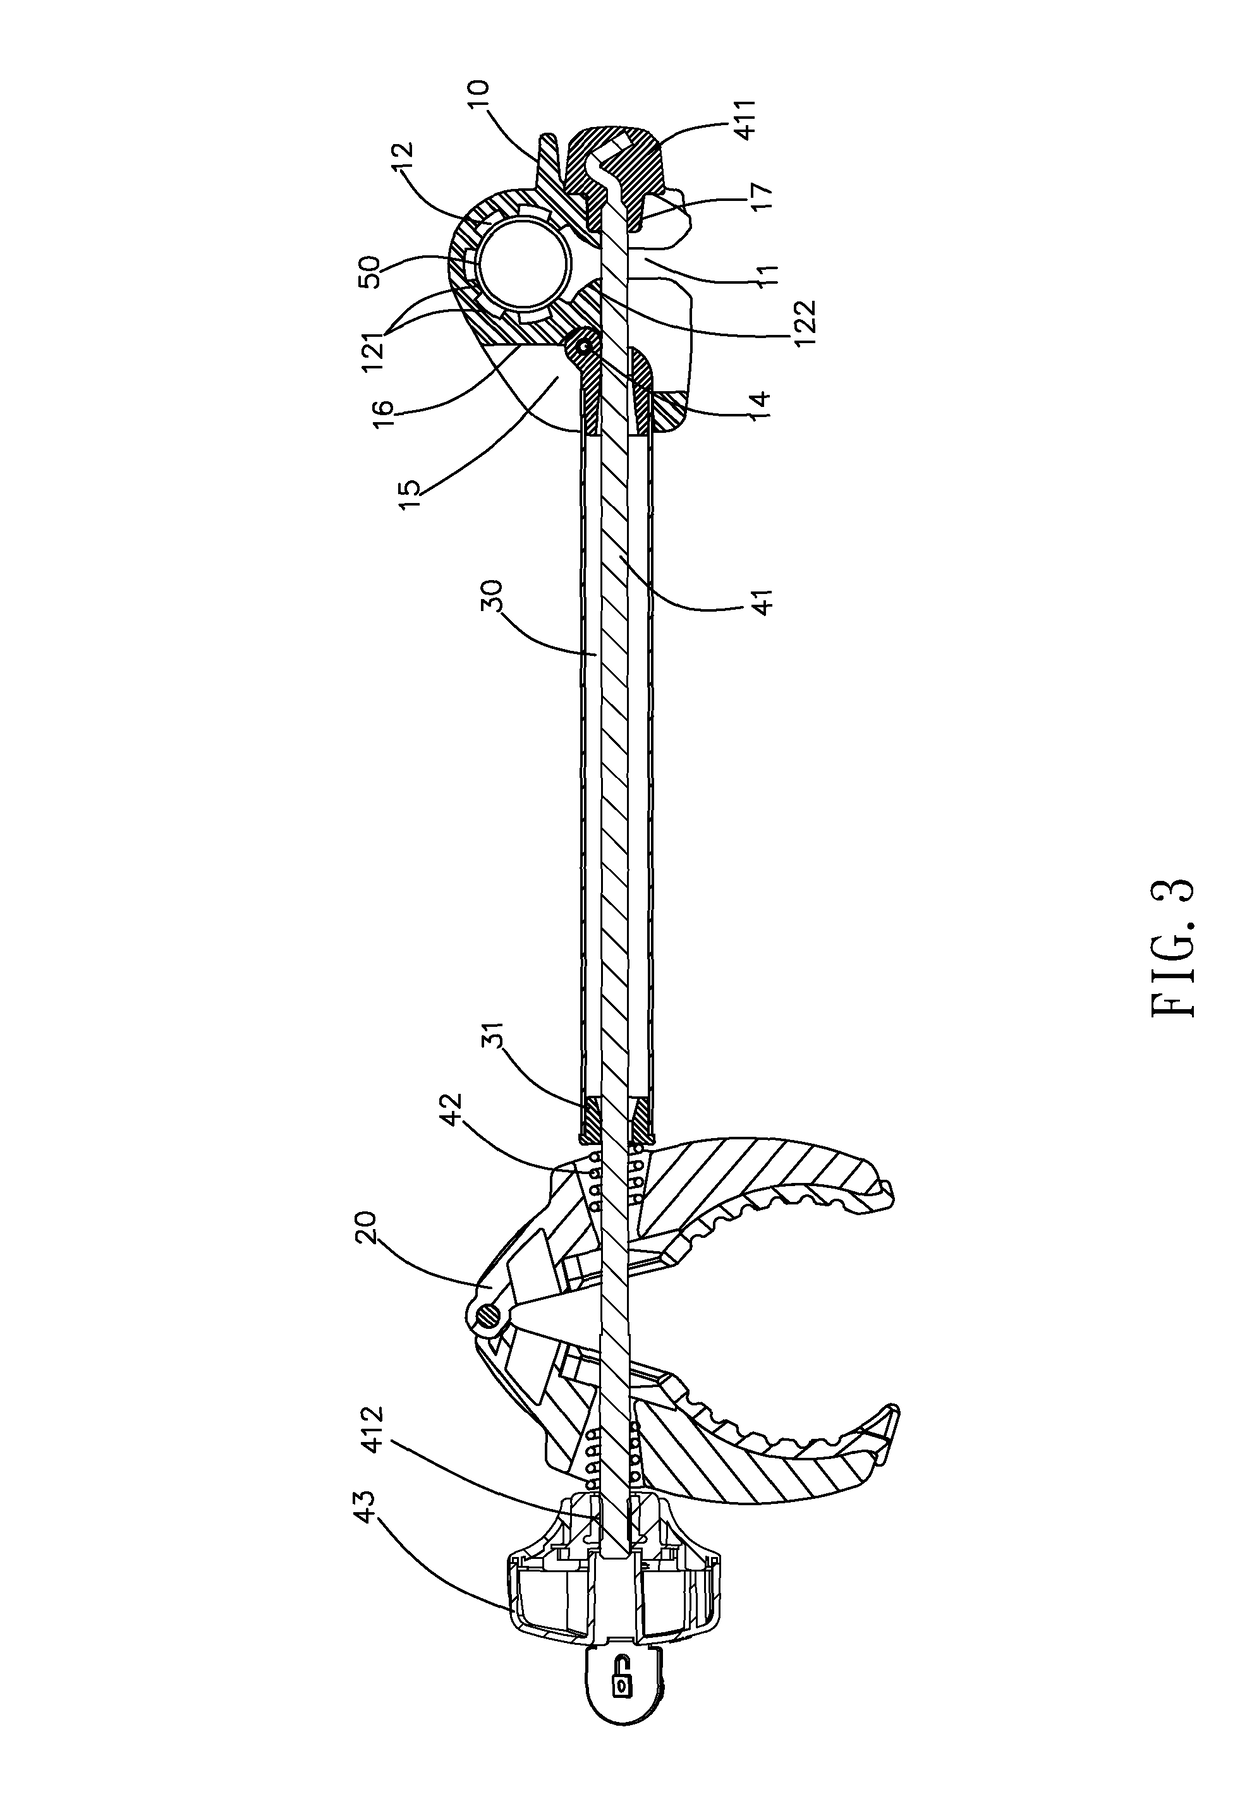 Clamping device for being connected to frame of bicycle carry rack